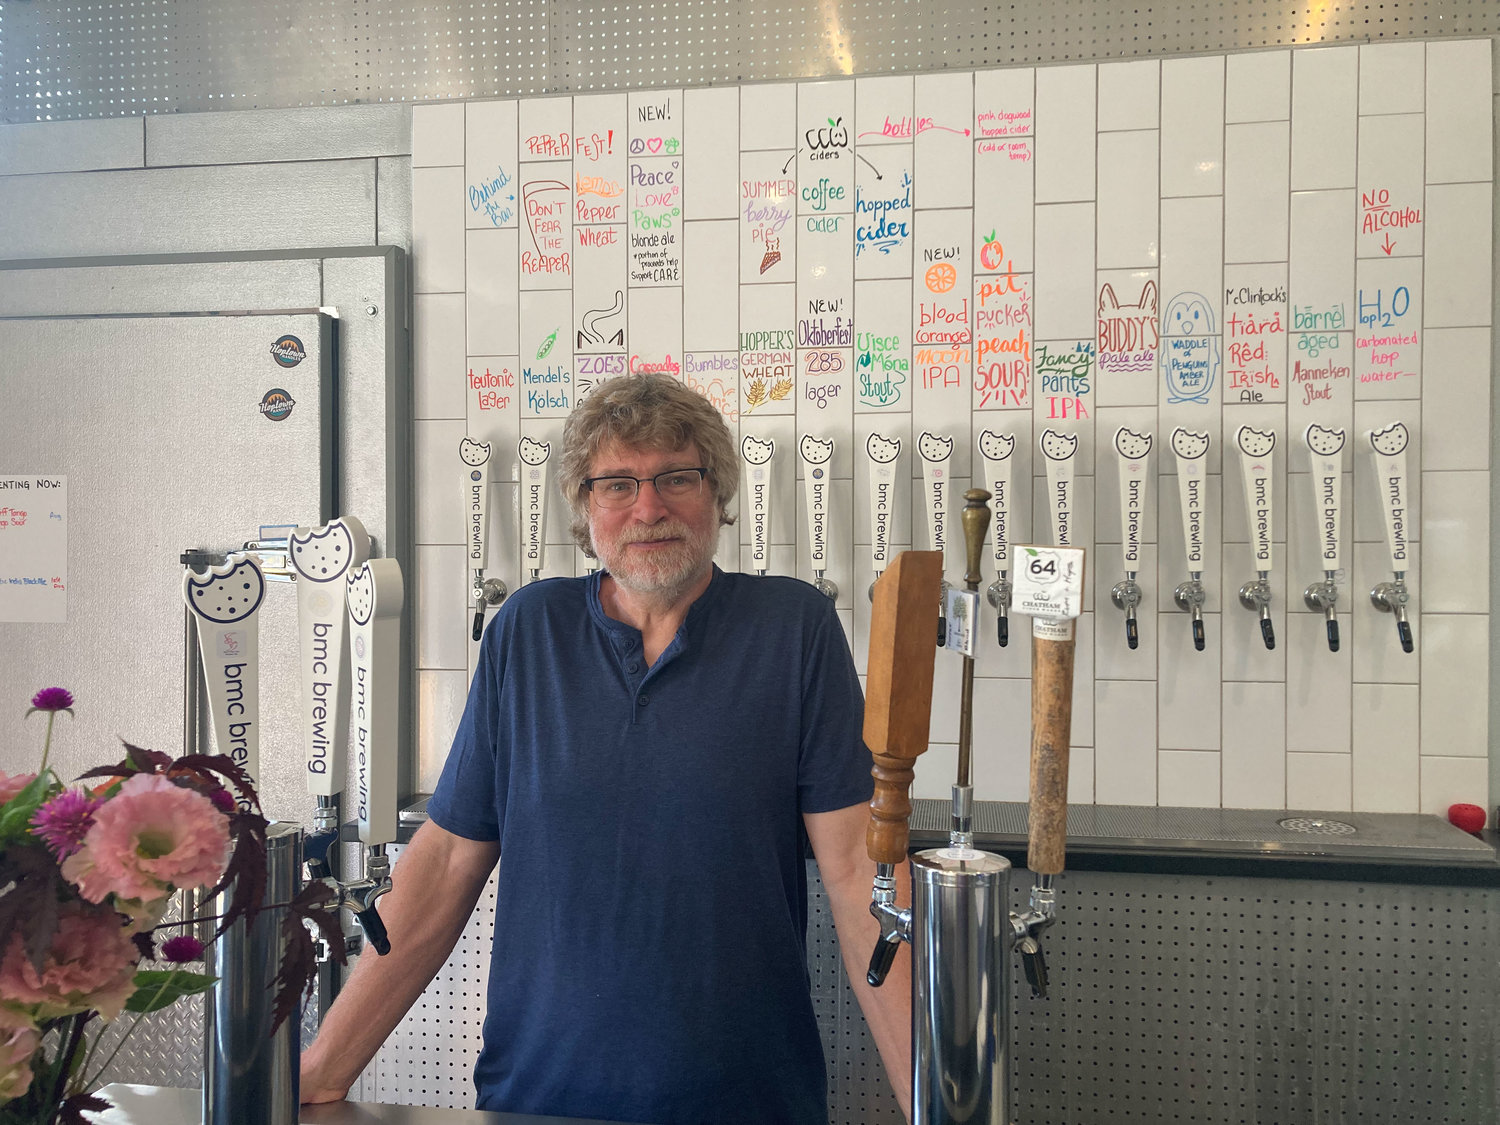 John Rice stands in bmc brewing's taproom, where the Peace, Love, Paws Blonde Ale is available for purchase.